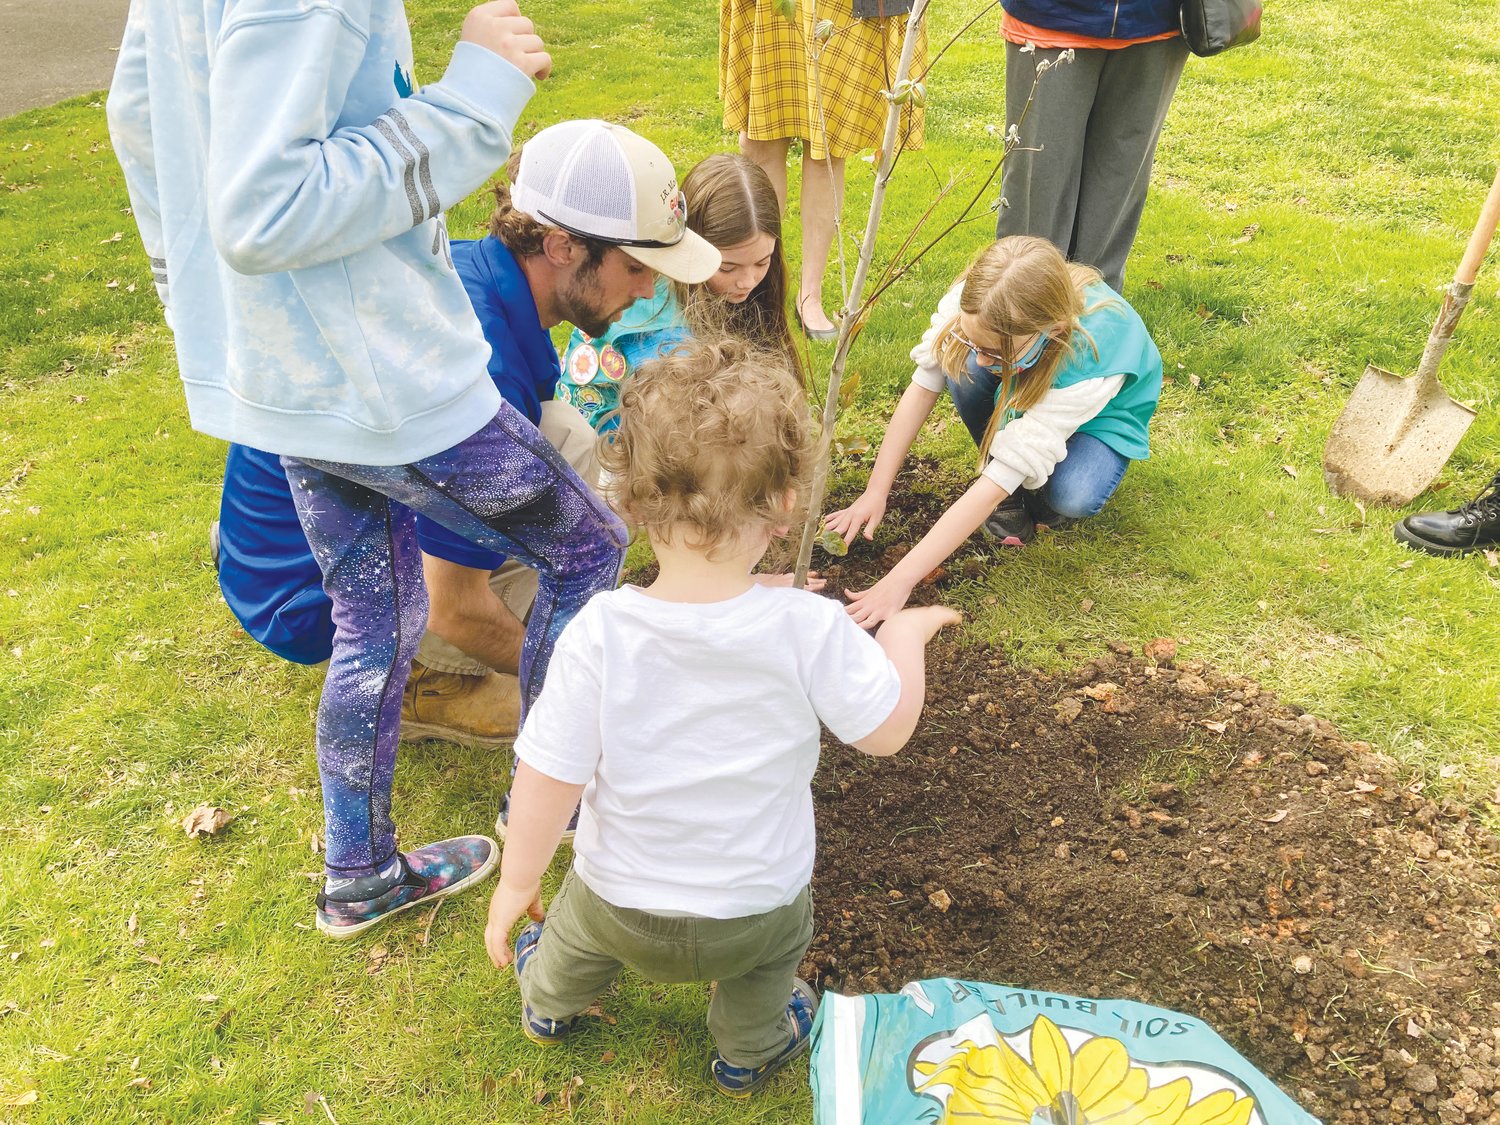 The tree planting event allowed the scouts to give back to their community and the environment.